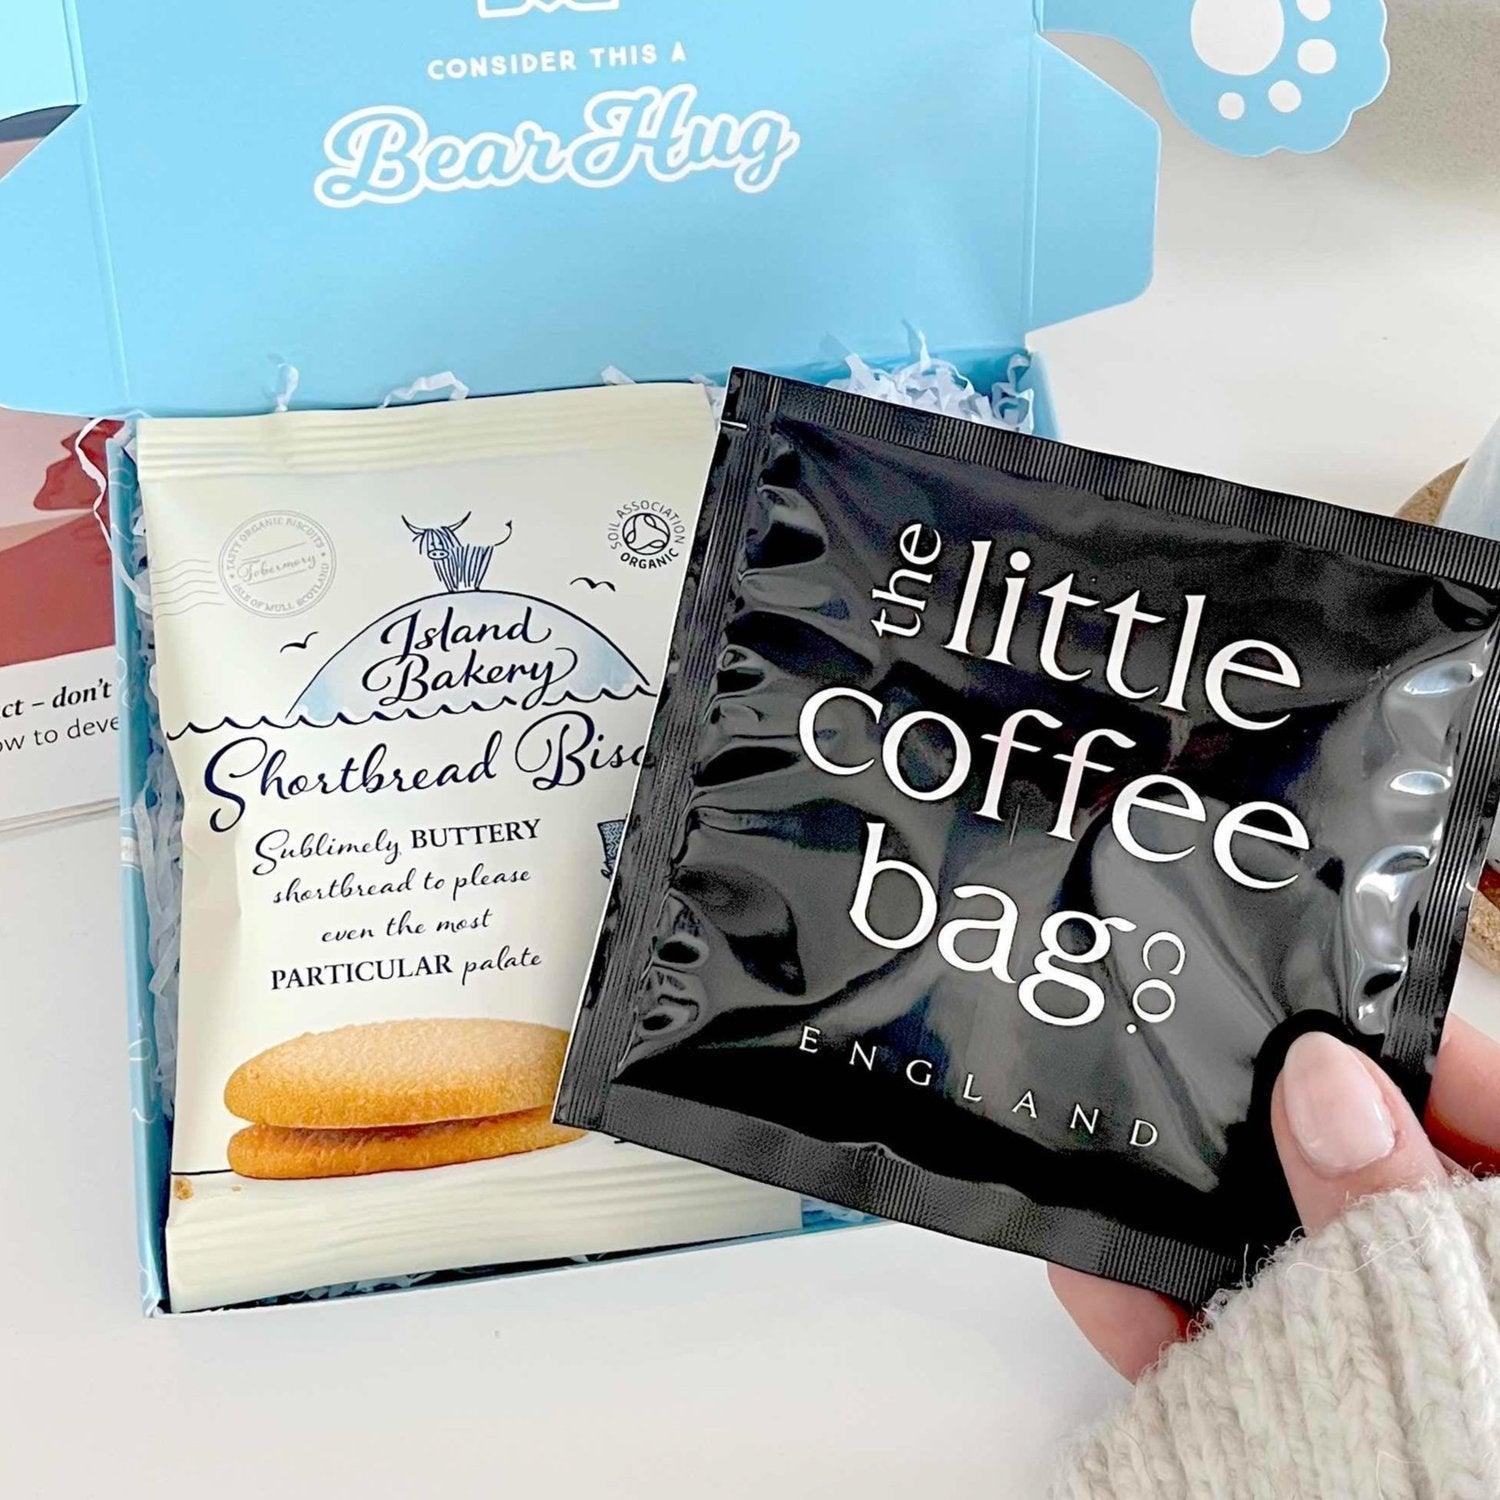 Coffee and Biscuits Letterbox Hug - BearHugs